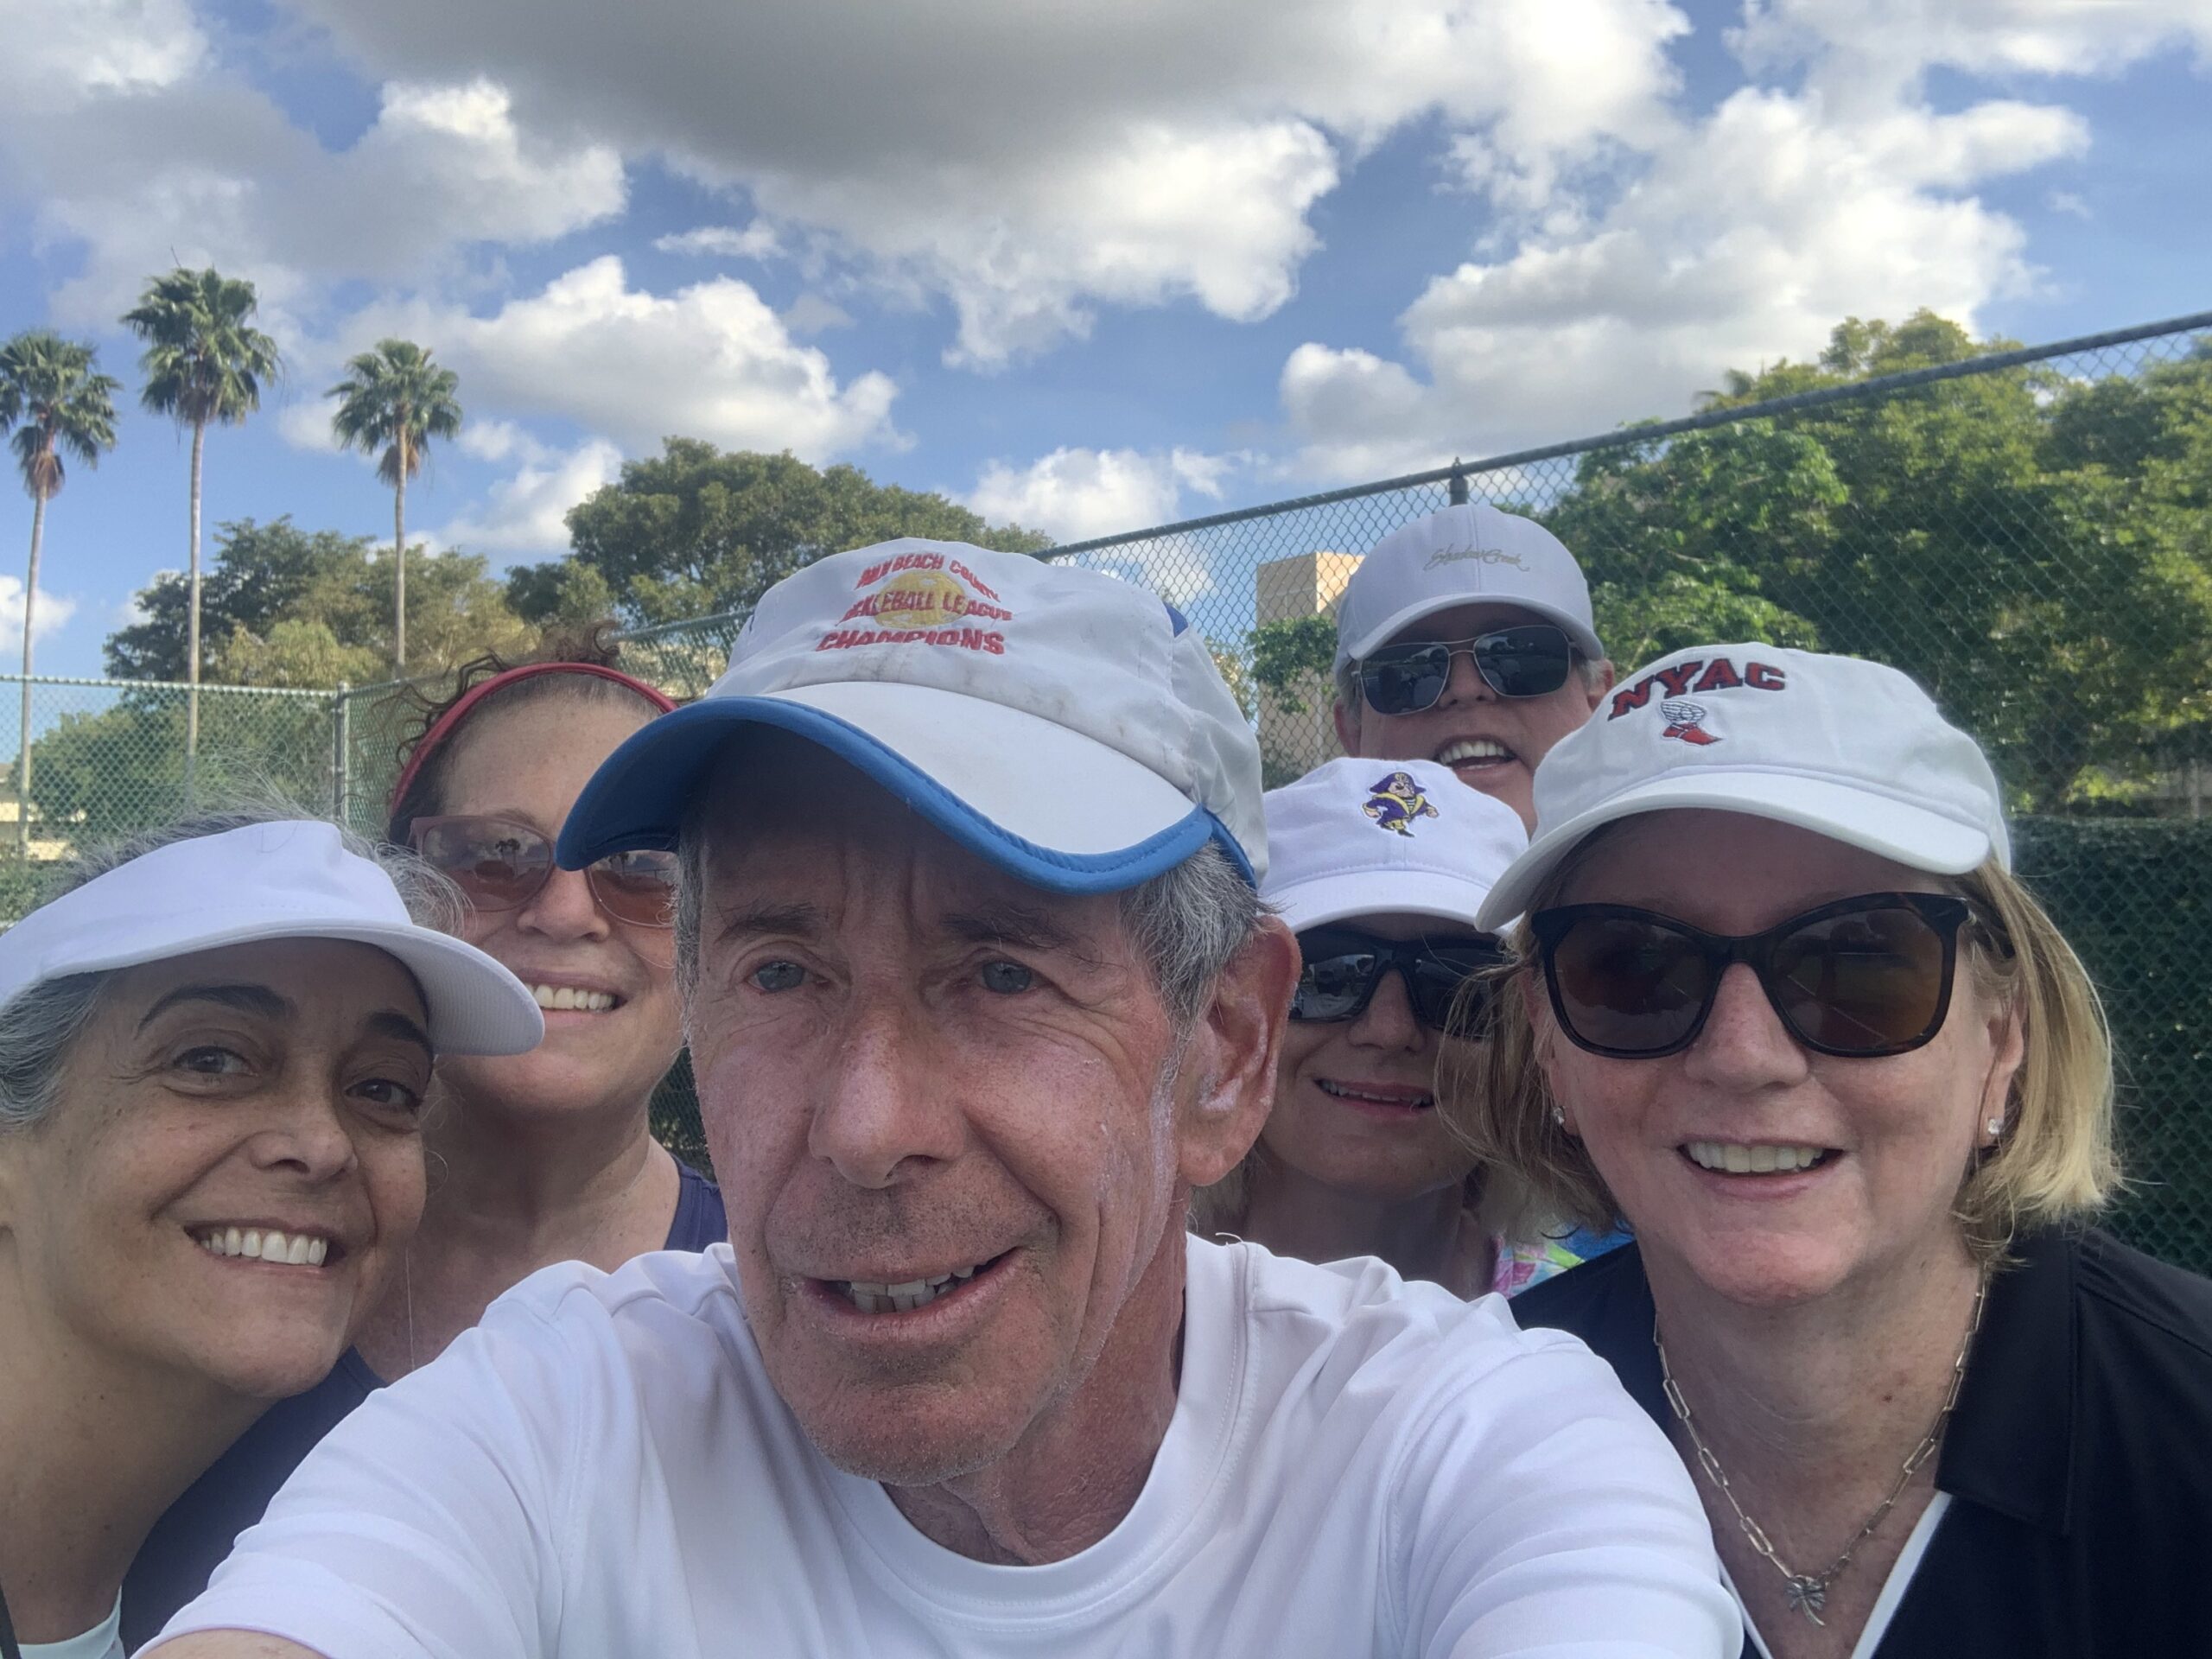 Bob with Maureen, Melanie, Tracy, and Jeff after a Beginners Pickleball Clinic in Delray Beach, FL.